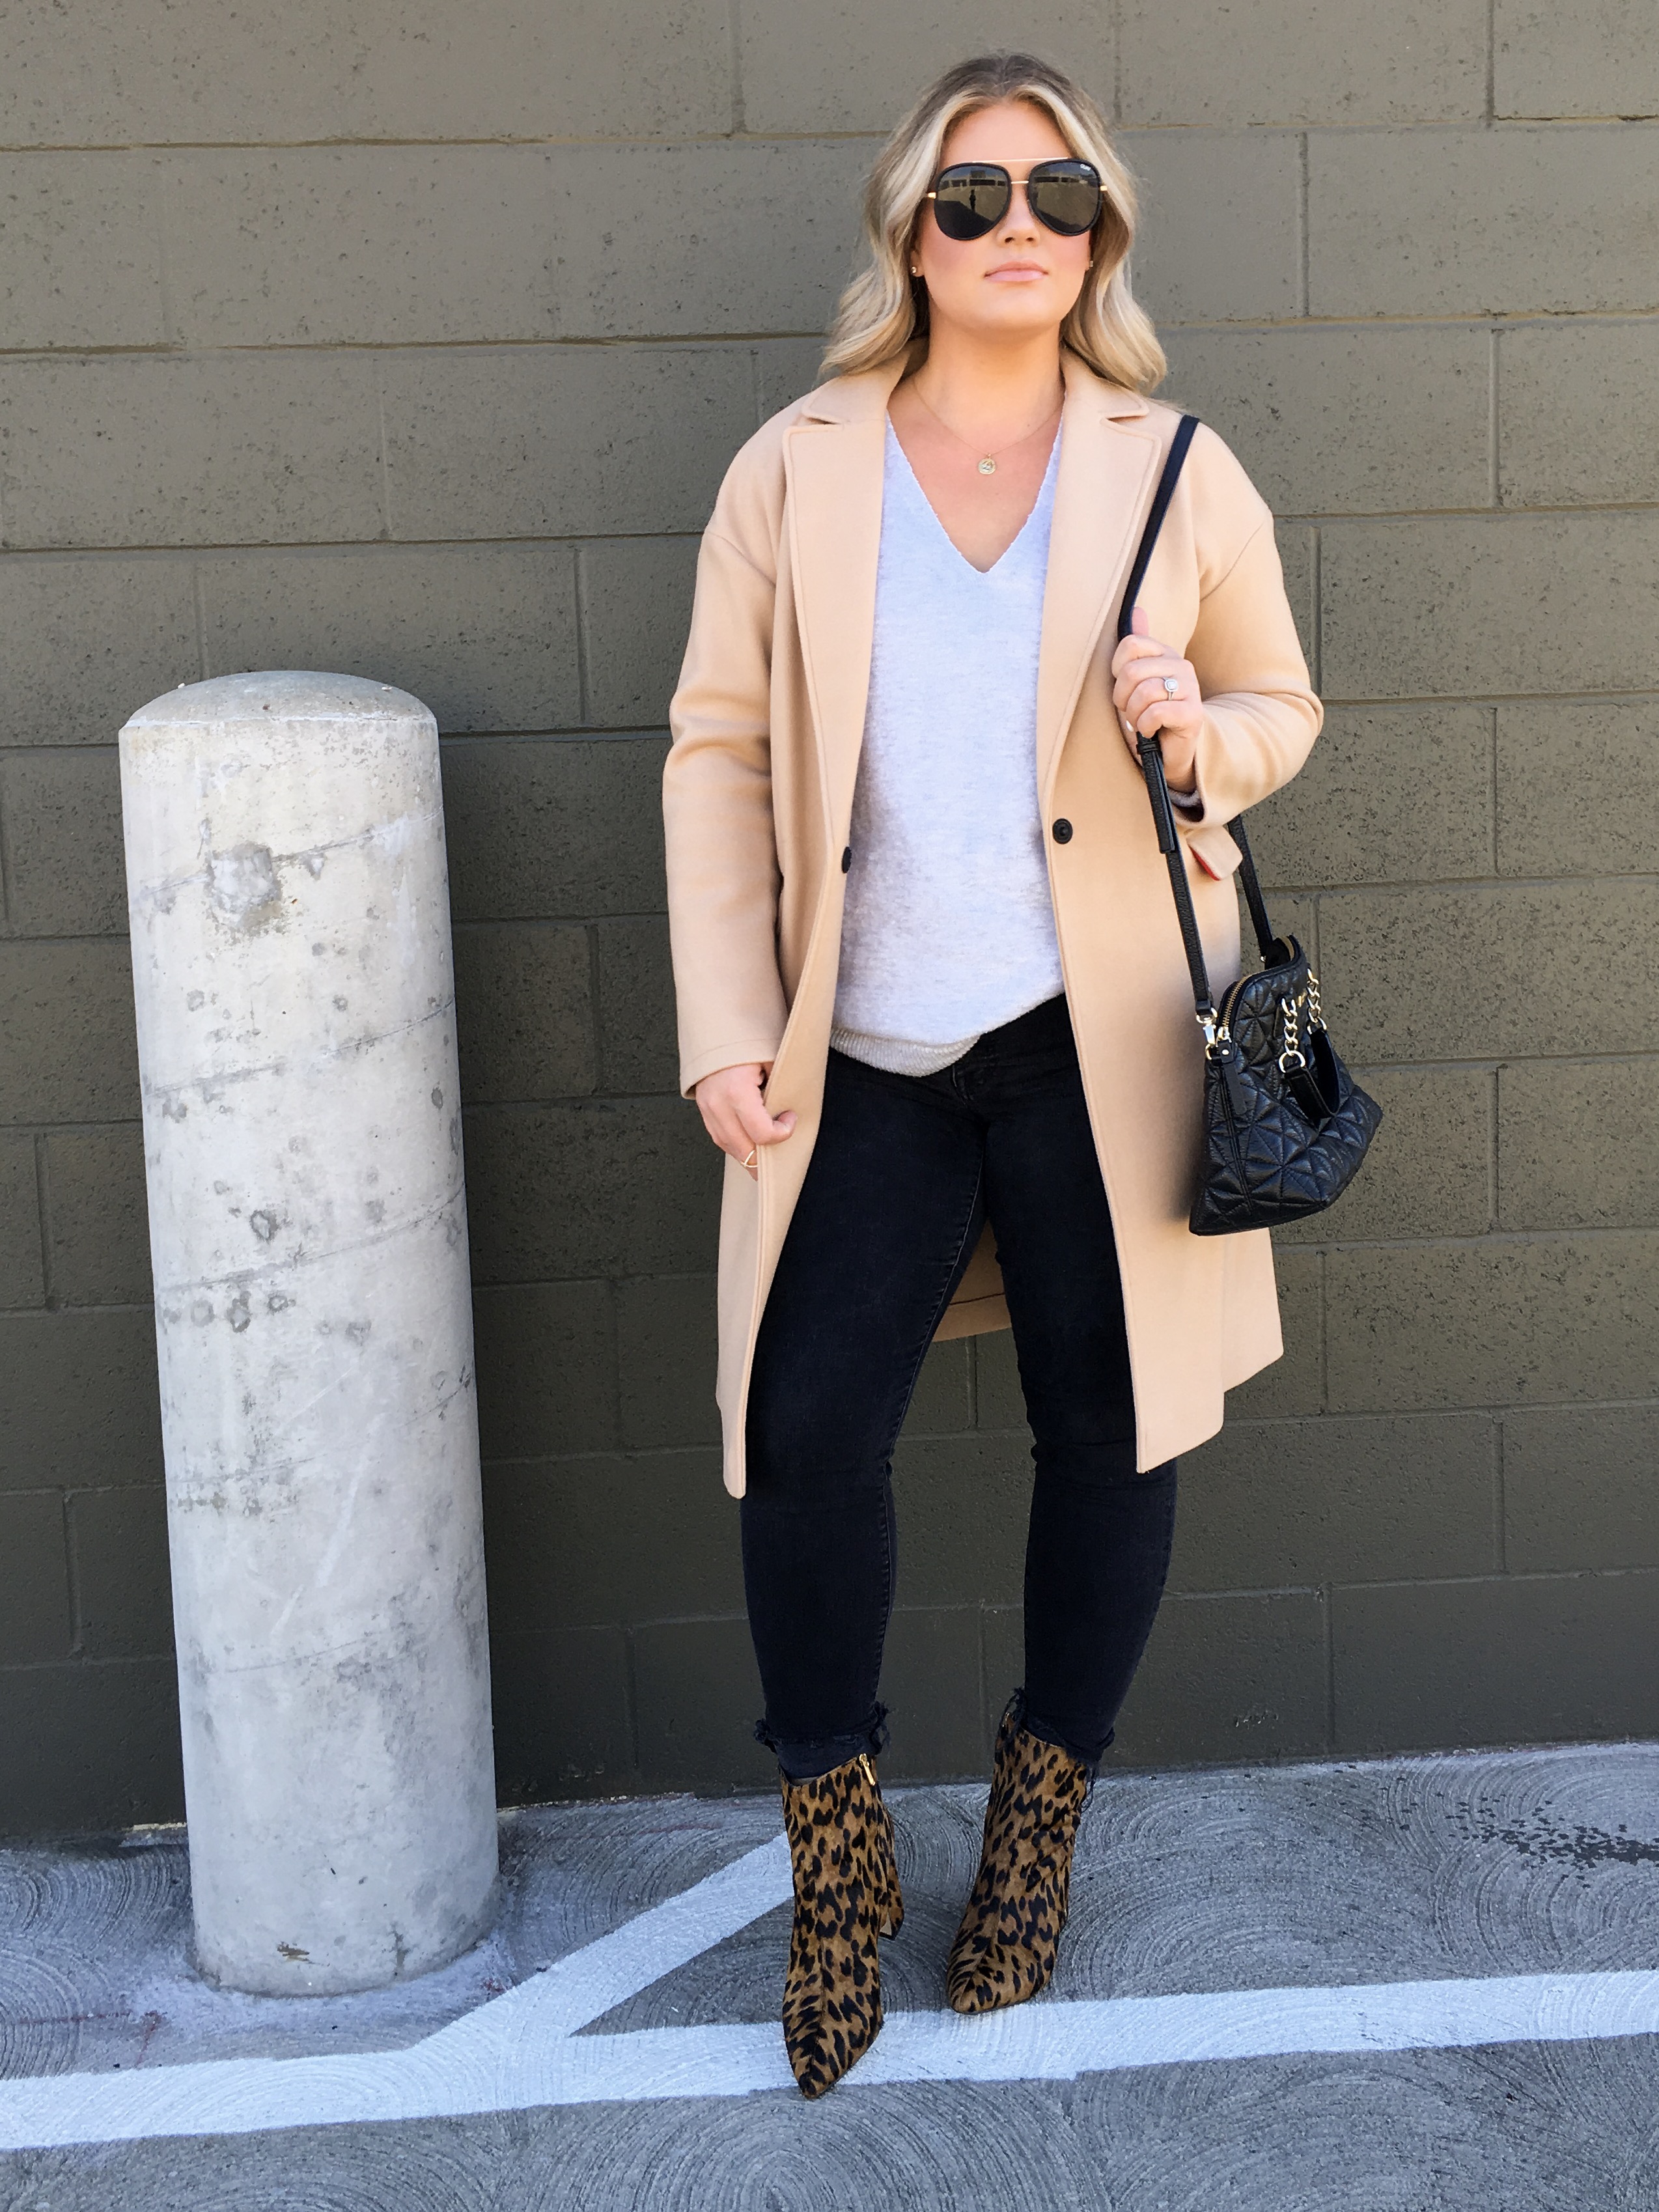 Leopard Booties + Classic Fall Staples 